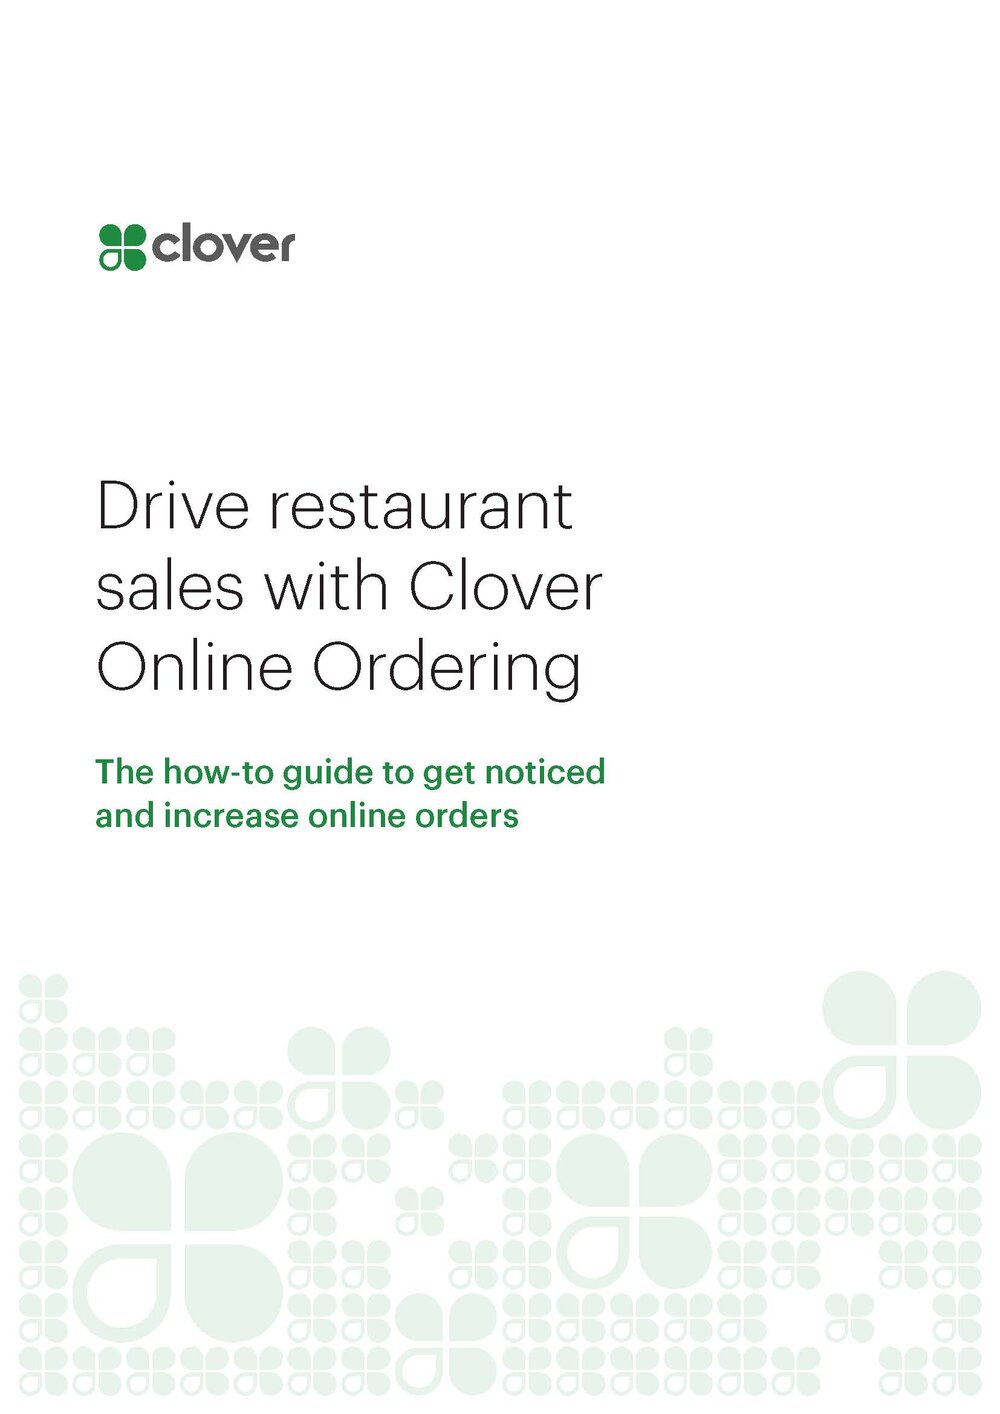 Drive Sales With Clover Online Ordering_Page_01.jpg